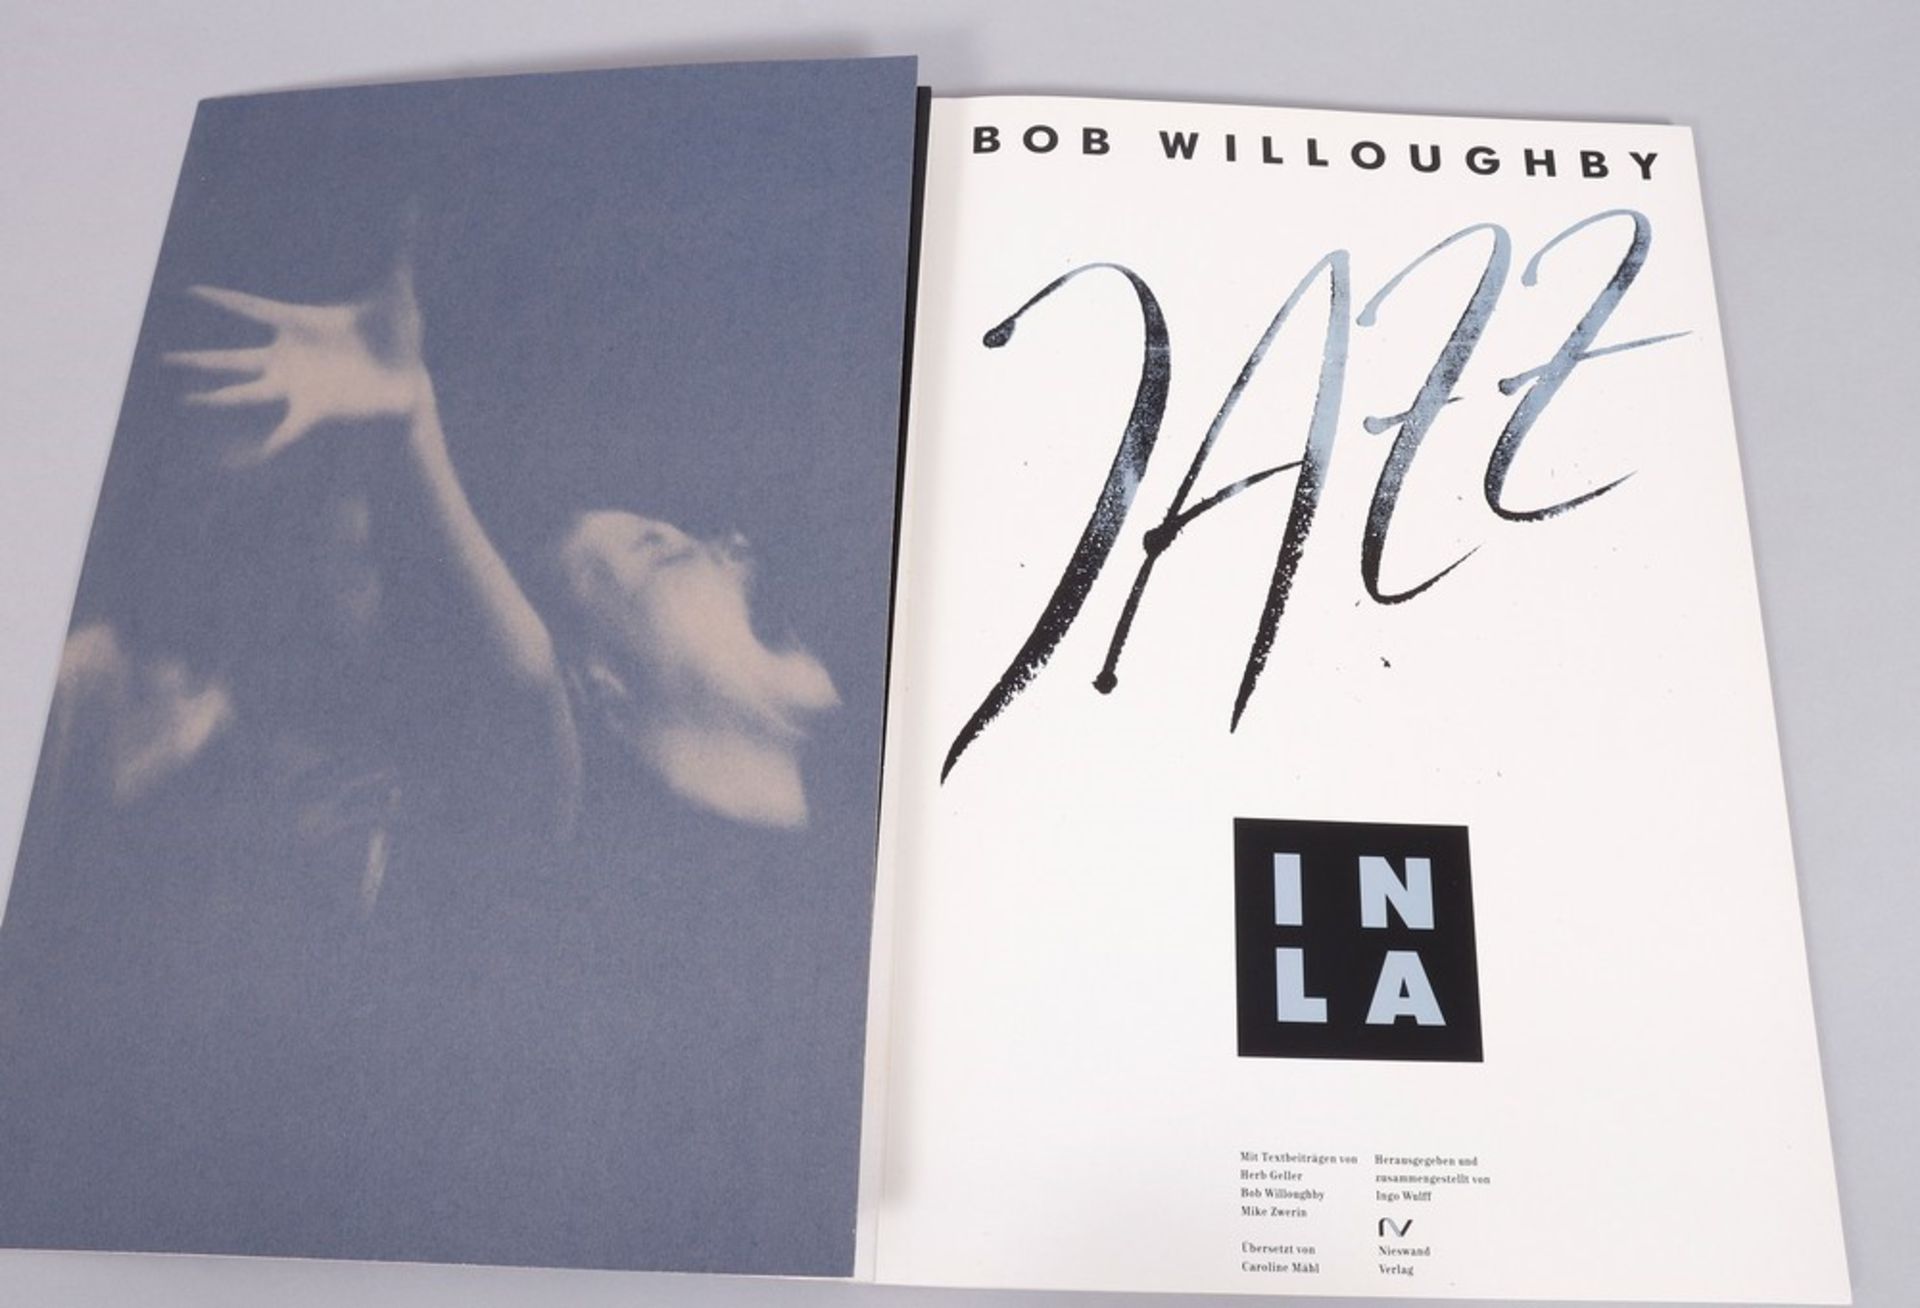 Book, Bob Willoughby (1927, Los Angeles - 2009, Vence)